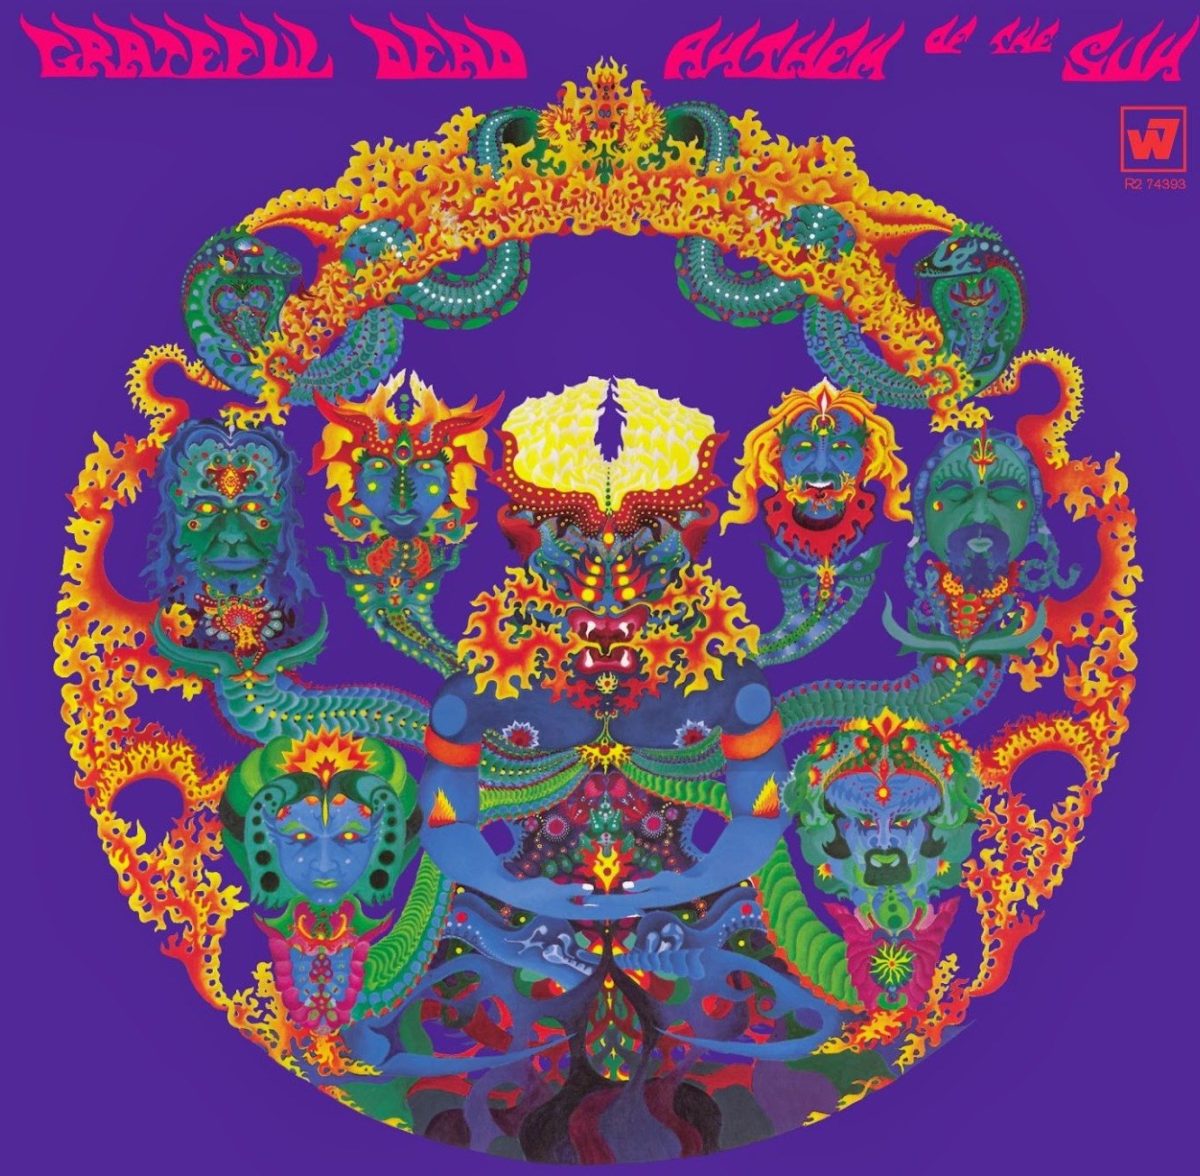 Relix 44: Grateful Dead’s ‘Anthem of the Sun’ at 50